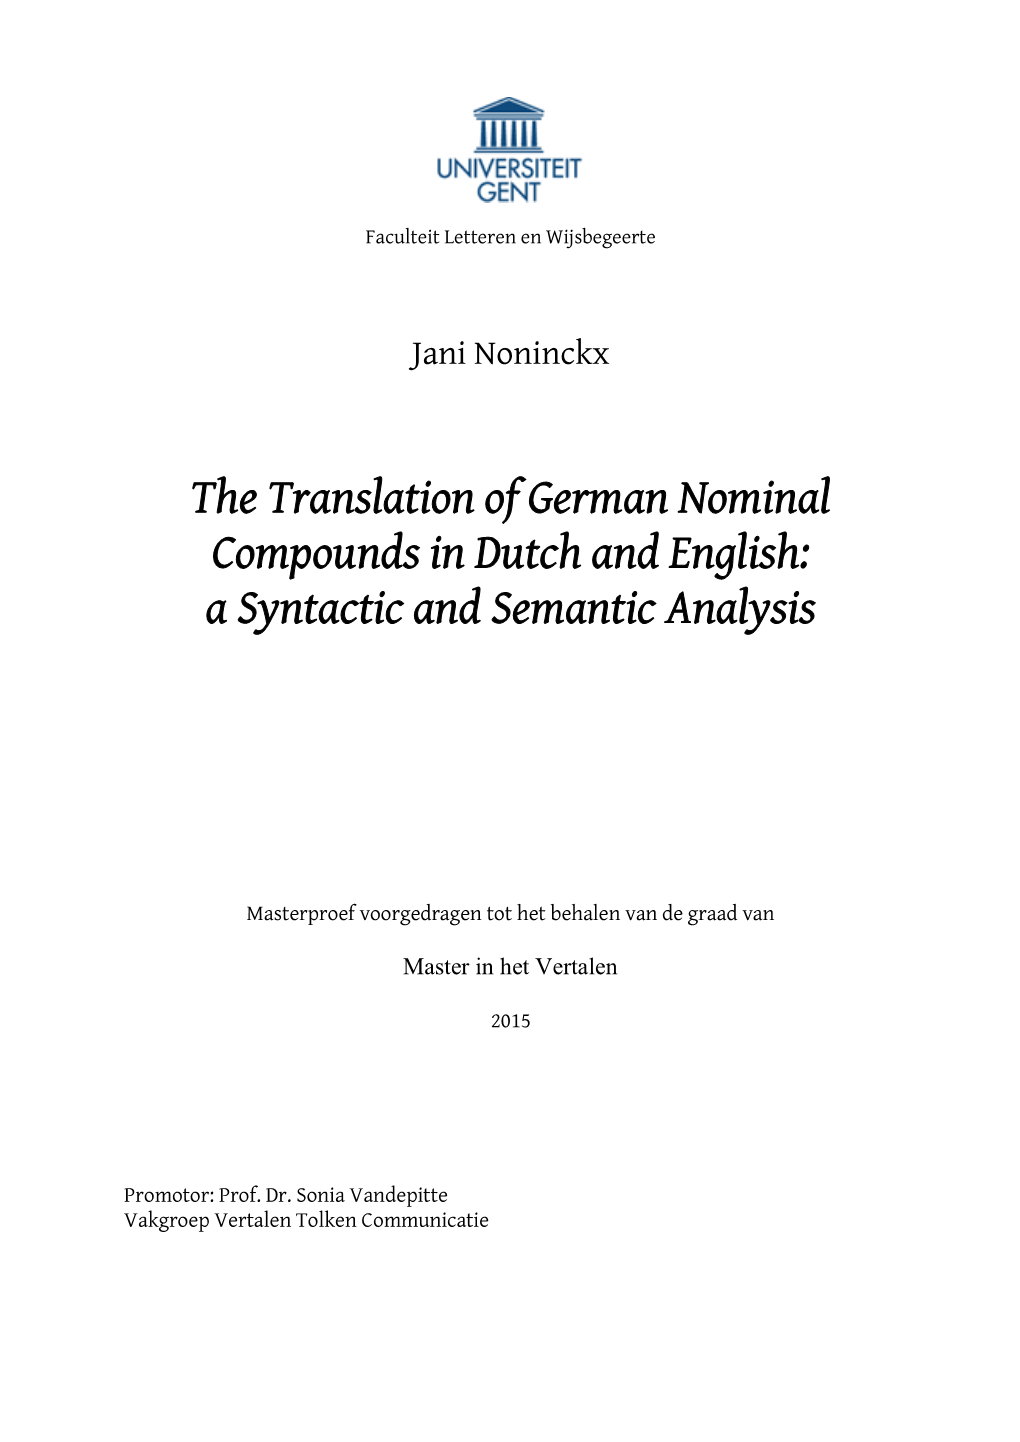 The Translation of German Nominal Compounds in Dutch and English: a Syntactic and Semantic Analysis